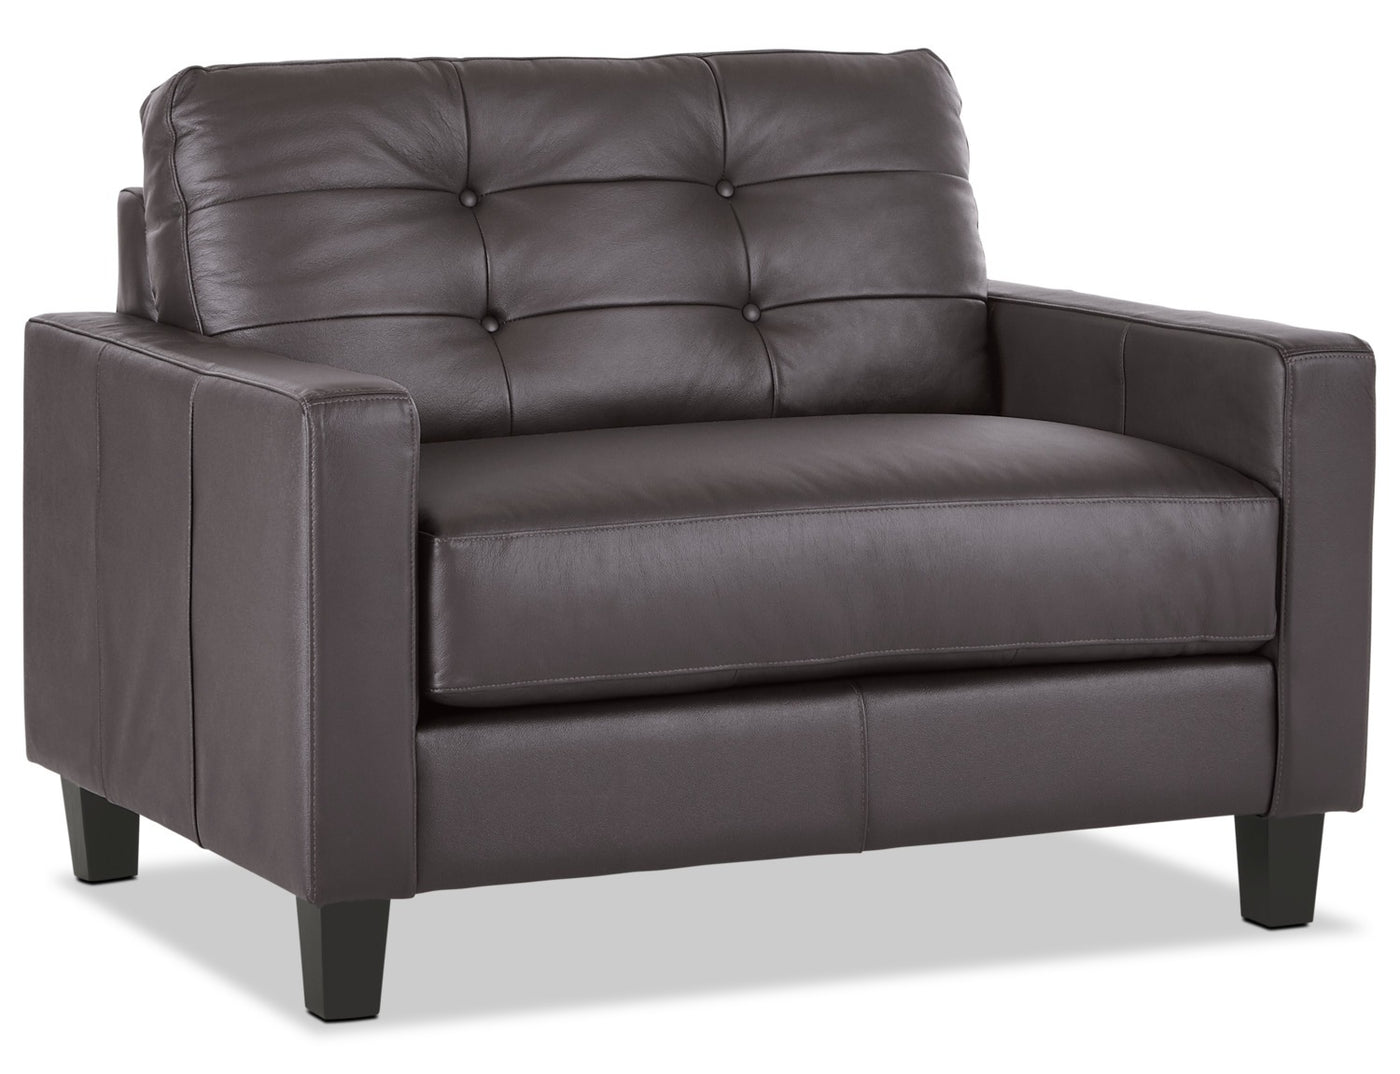 Kylie Leather Sofa, Loveseat and Chair and a Half Set - Coffee